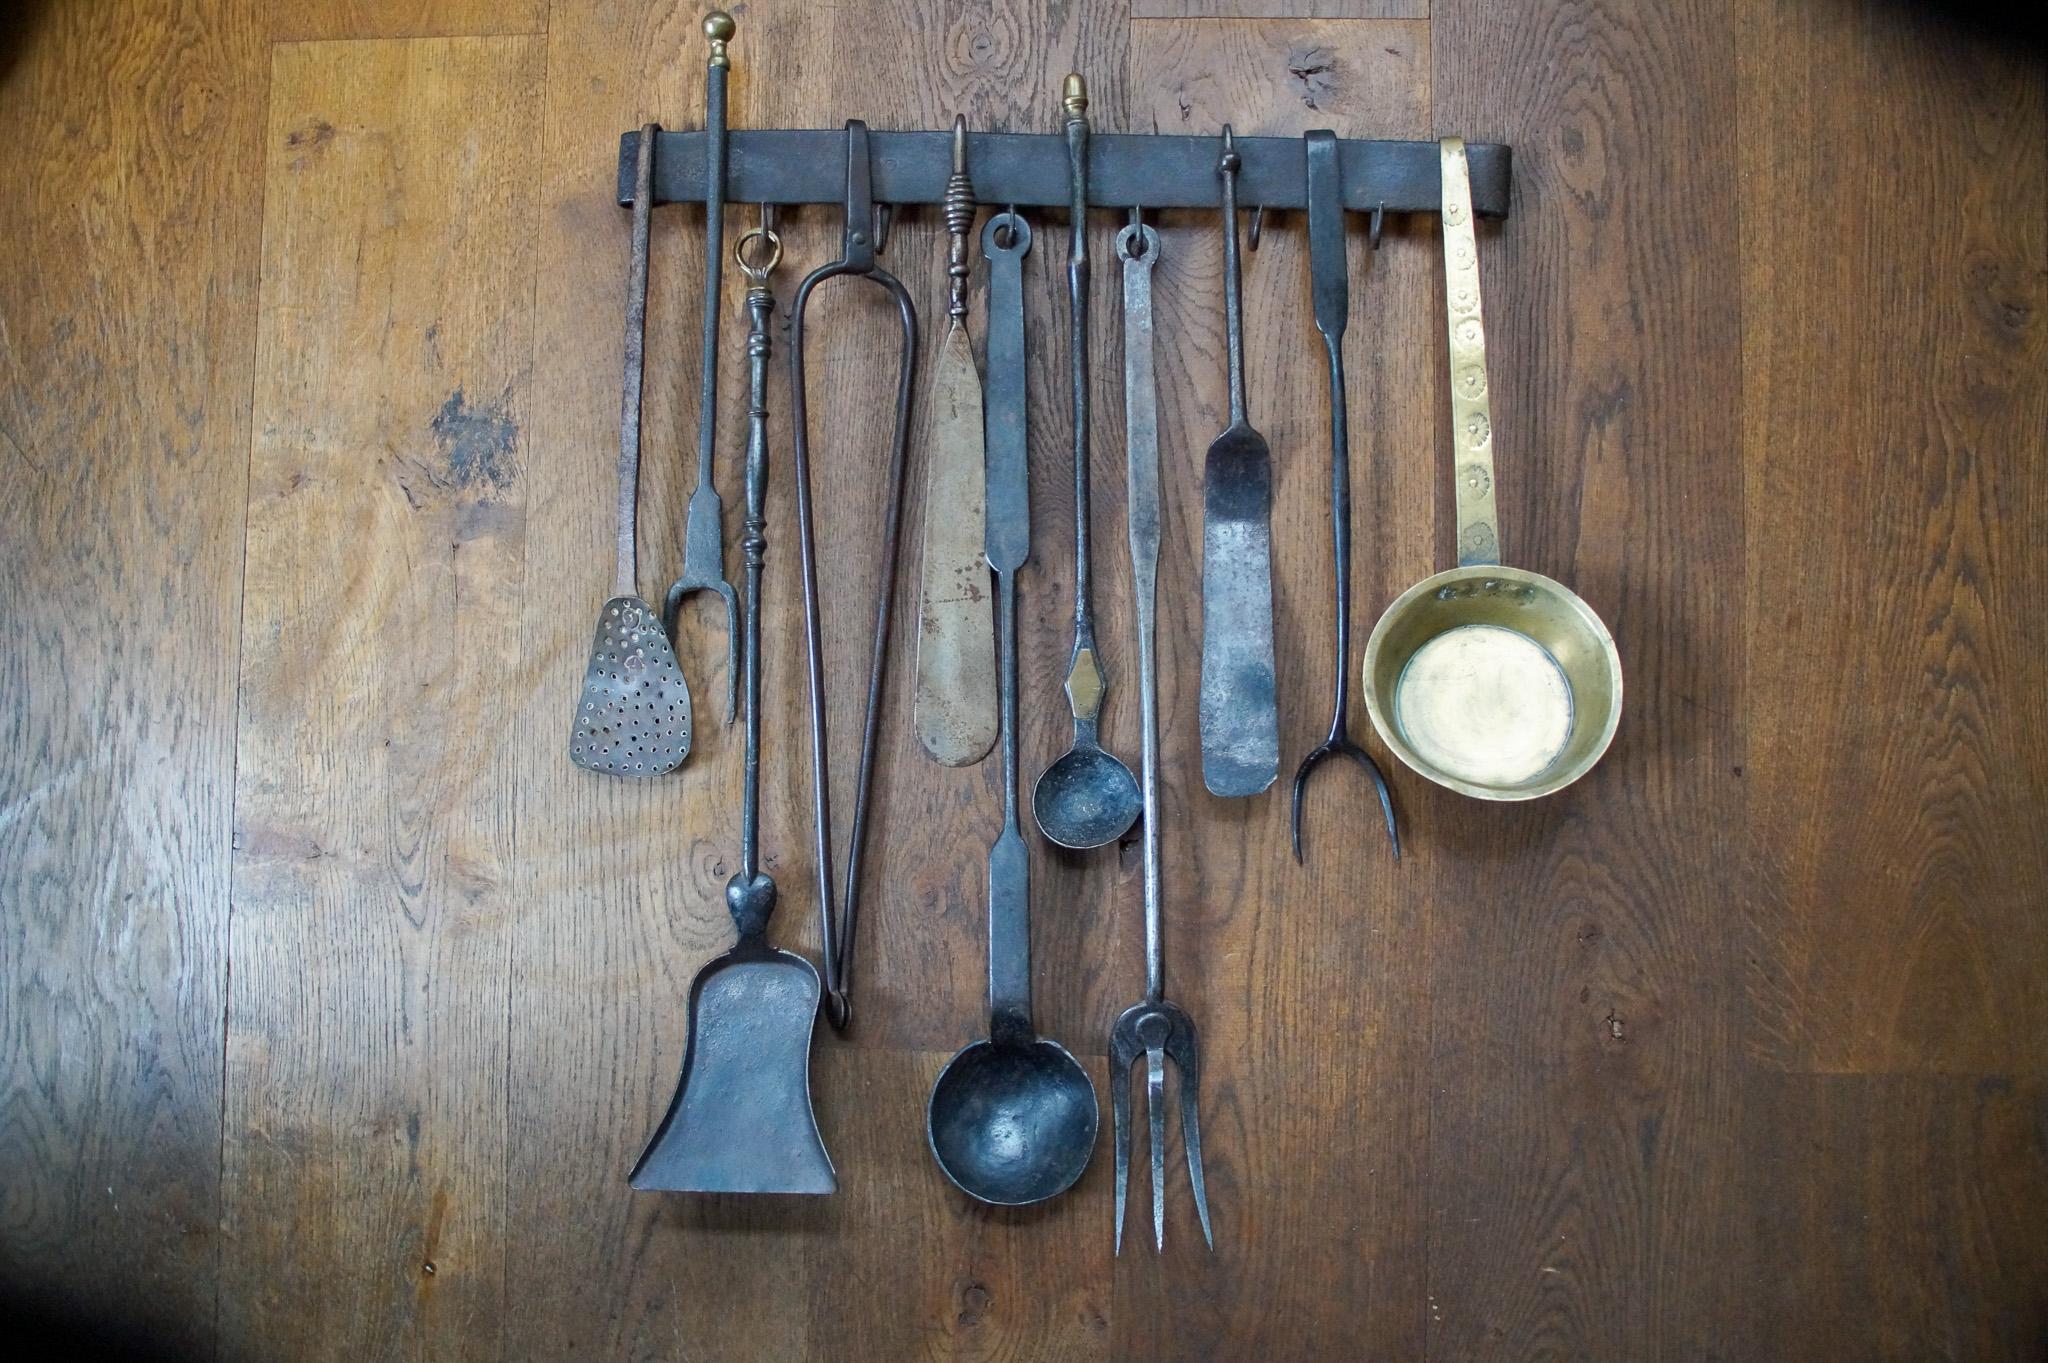 18th - 19th century Dutch neoclassical fireplace tool set consisting of a fireplace tongs, three tasting forks, 3 spoons, a skimmer, a shovel, two spatulas and a hanger. The set is also made of wrought iron and some brass. They are in a good